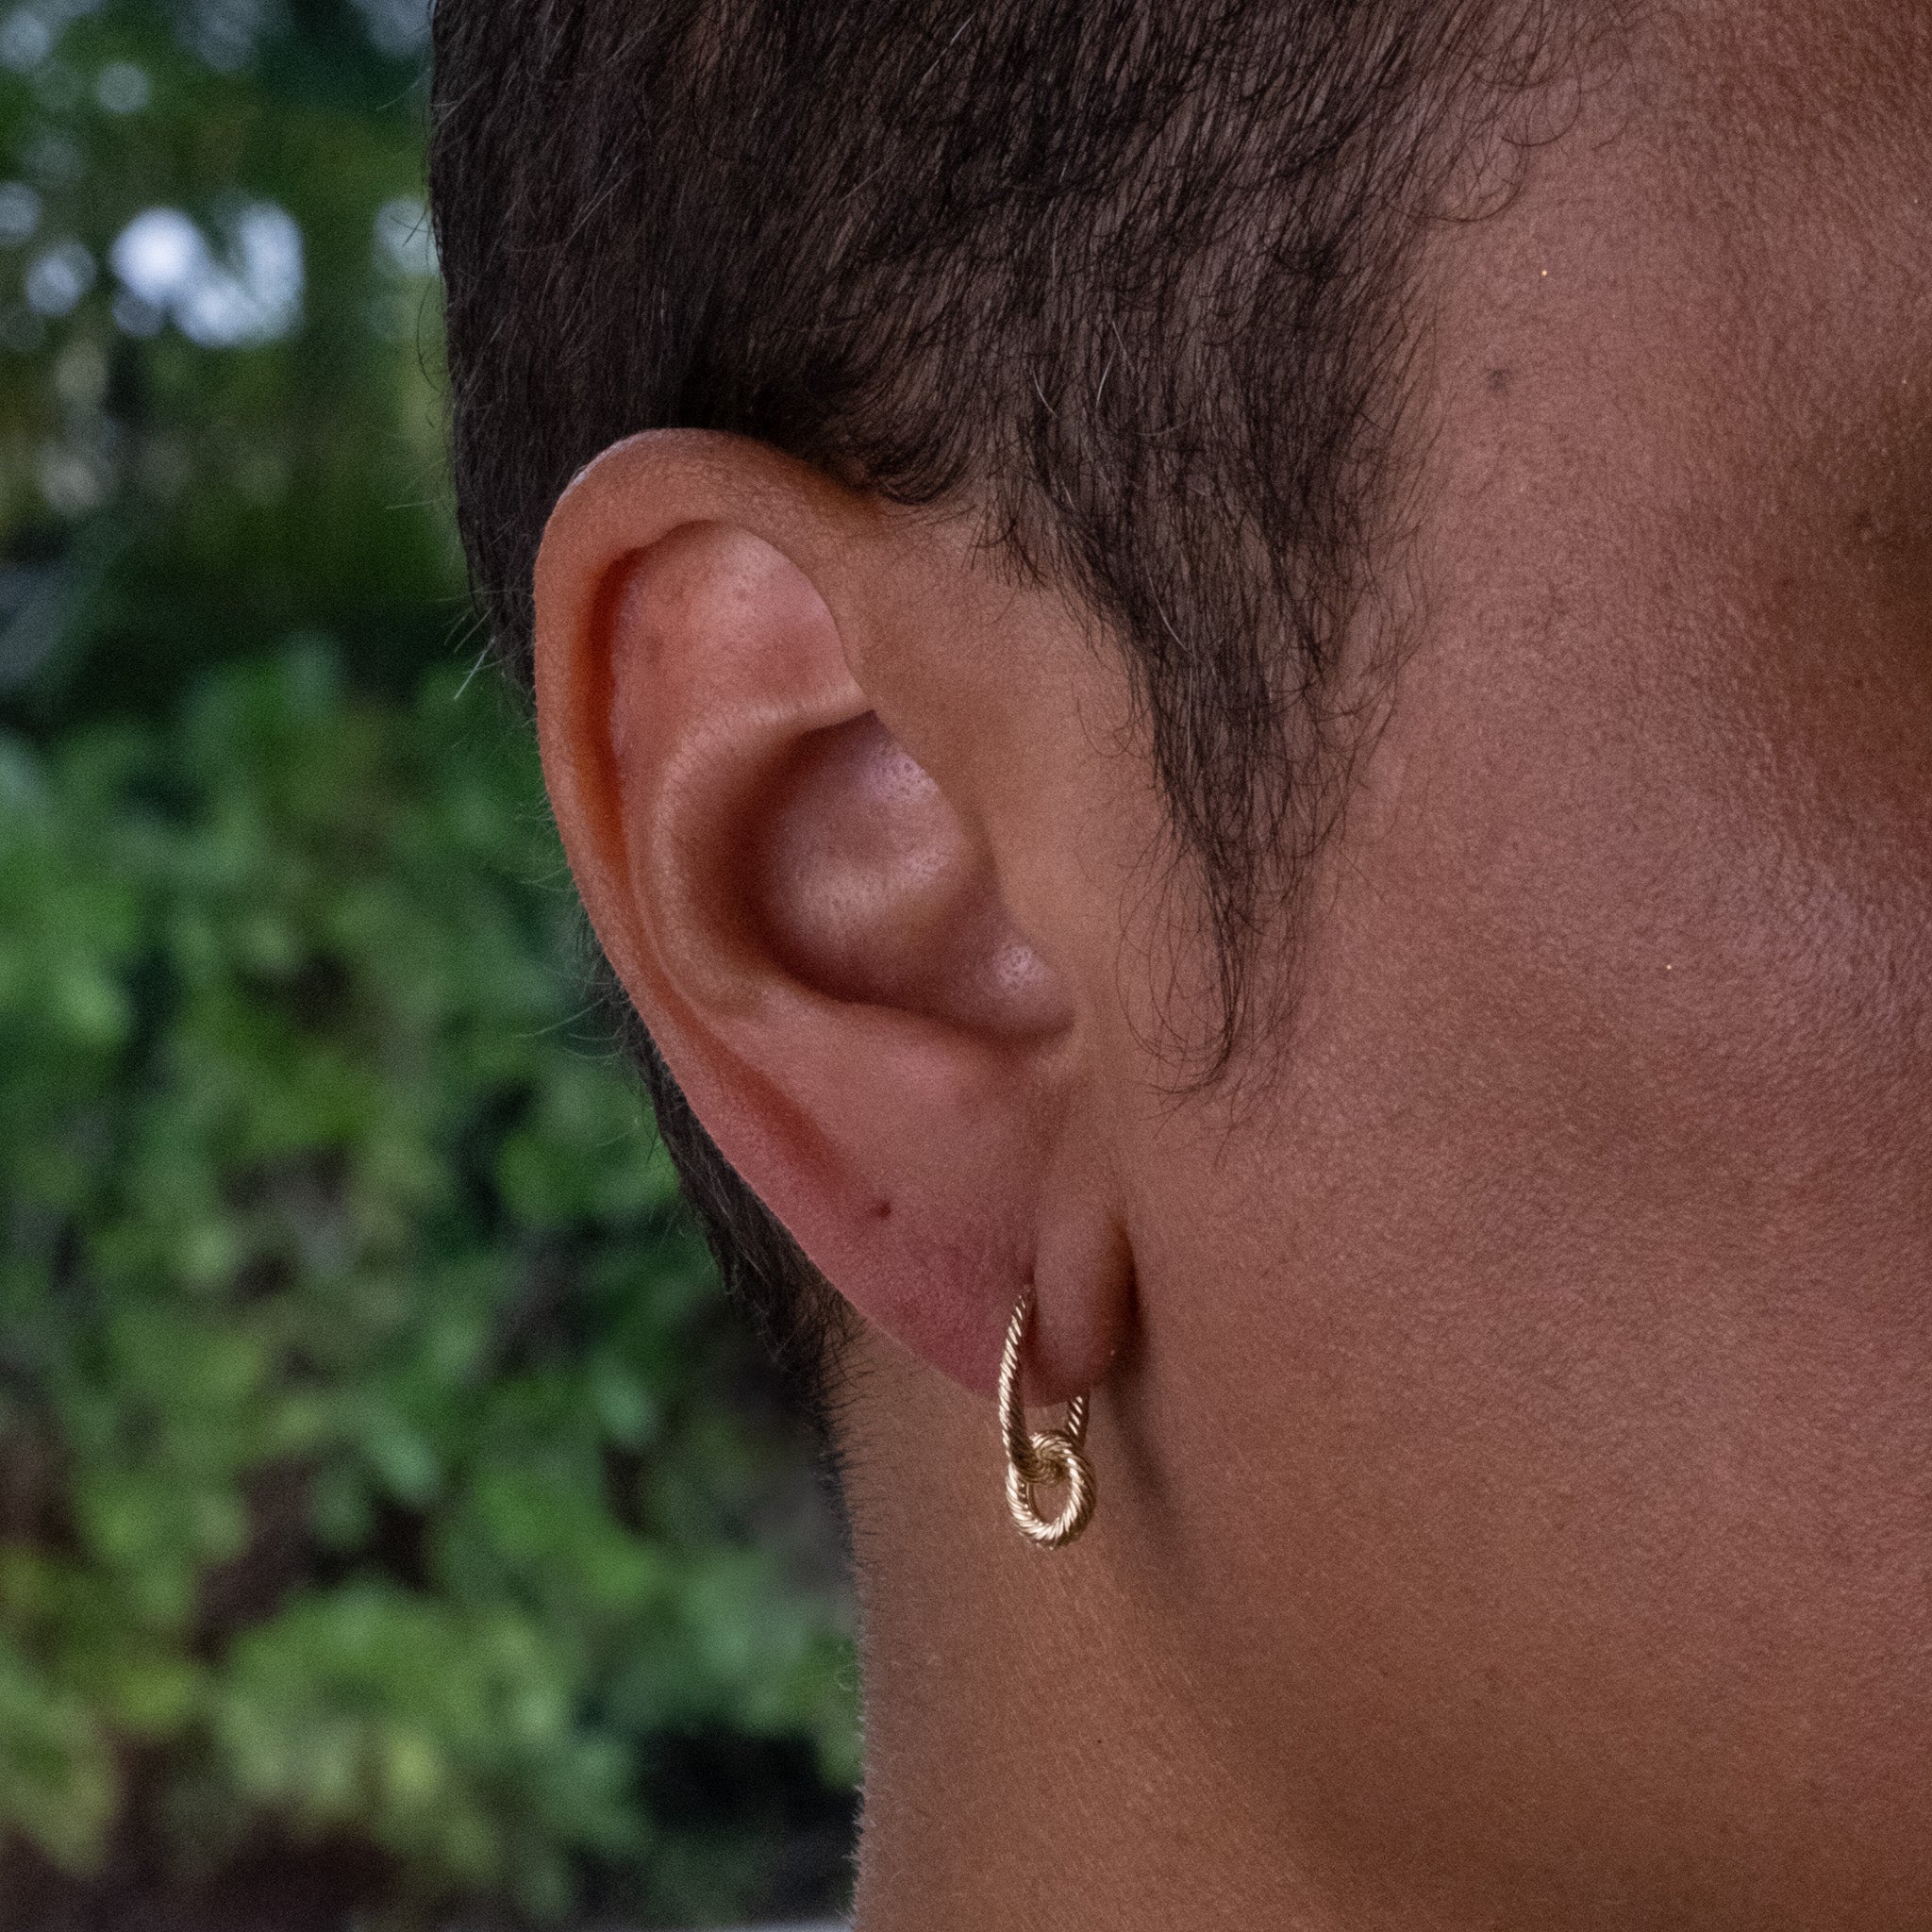 a close up of a person wearing a pair of earrings.